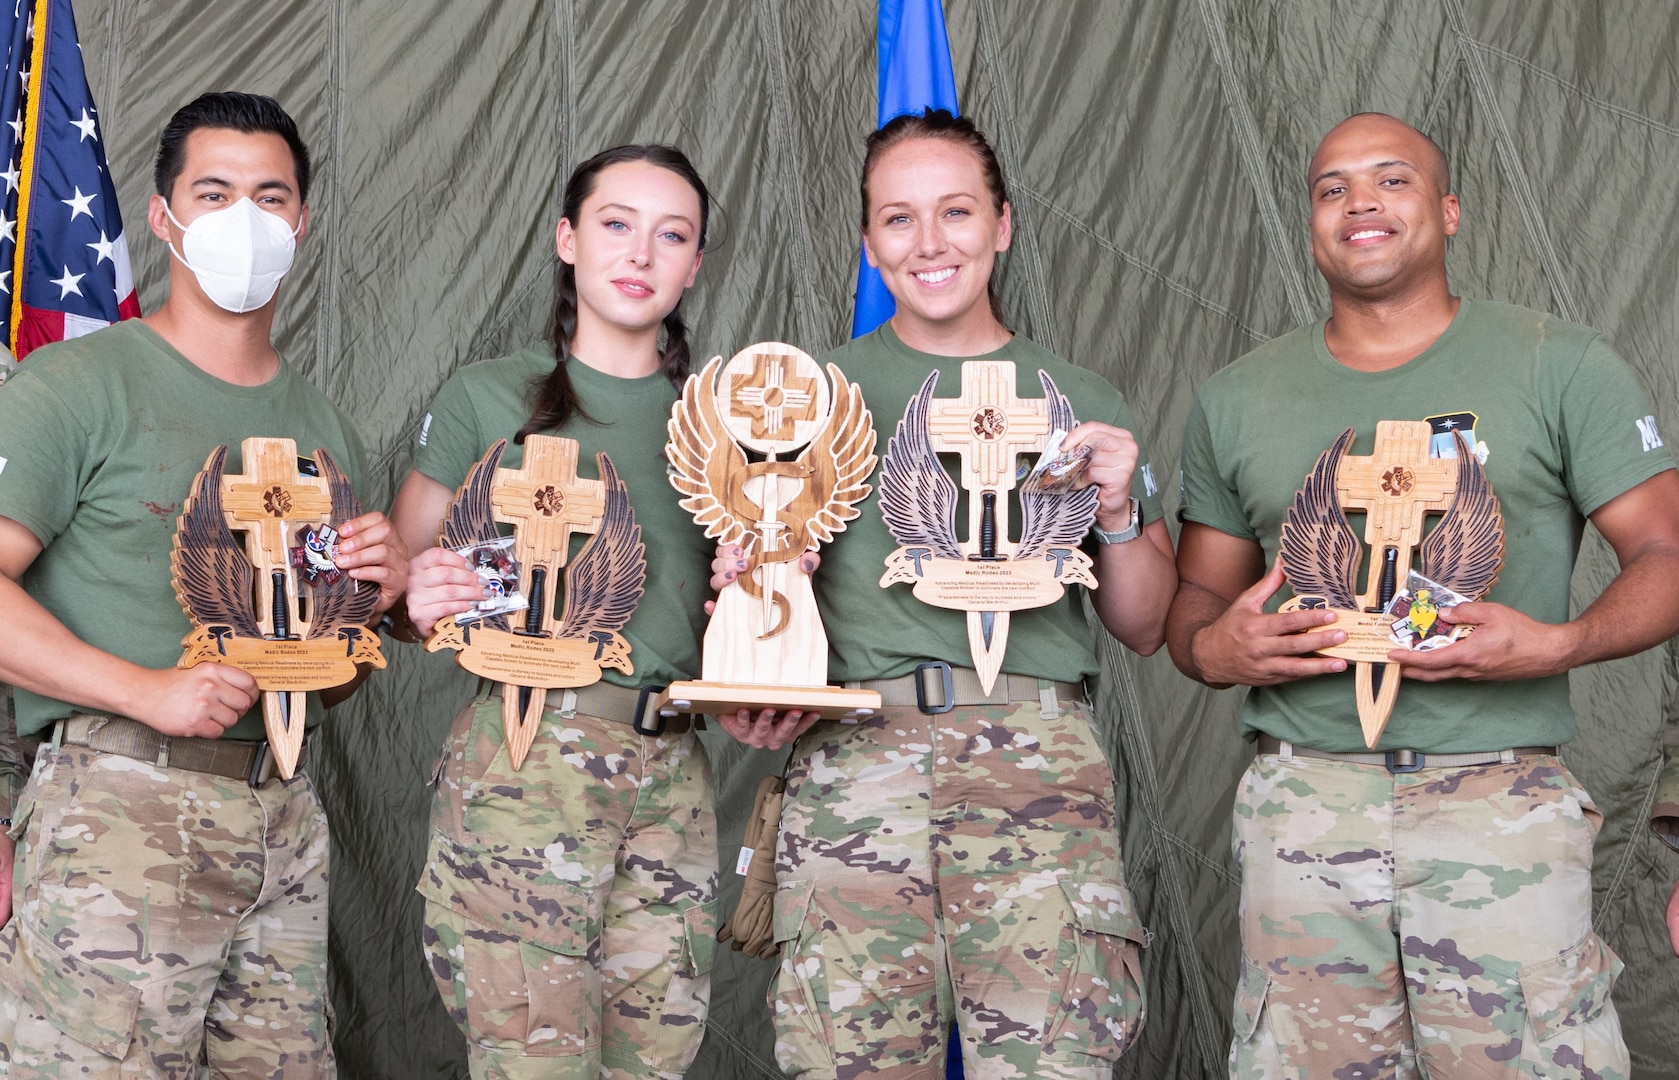 The U.S. Air Force Academy’s 10th Medical Group bucked the competition to take home first place at the 2023 Medic Rodeo competition at Cannon Air Force Base, N.M. Aug. 21-25.

The four-person 10th MDG team saddled up to compete against 17 teams from across the Air Force to determine which medical team was best prepared to provide medical care in a combat environment.